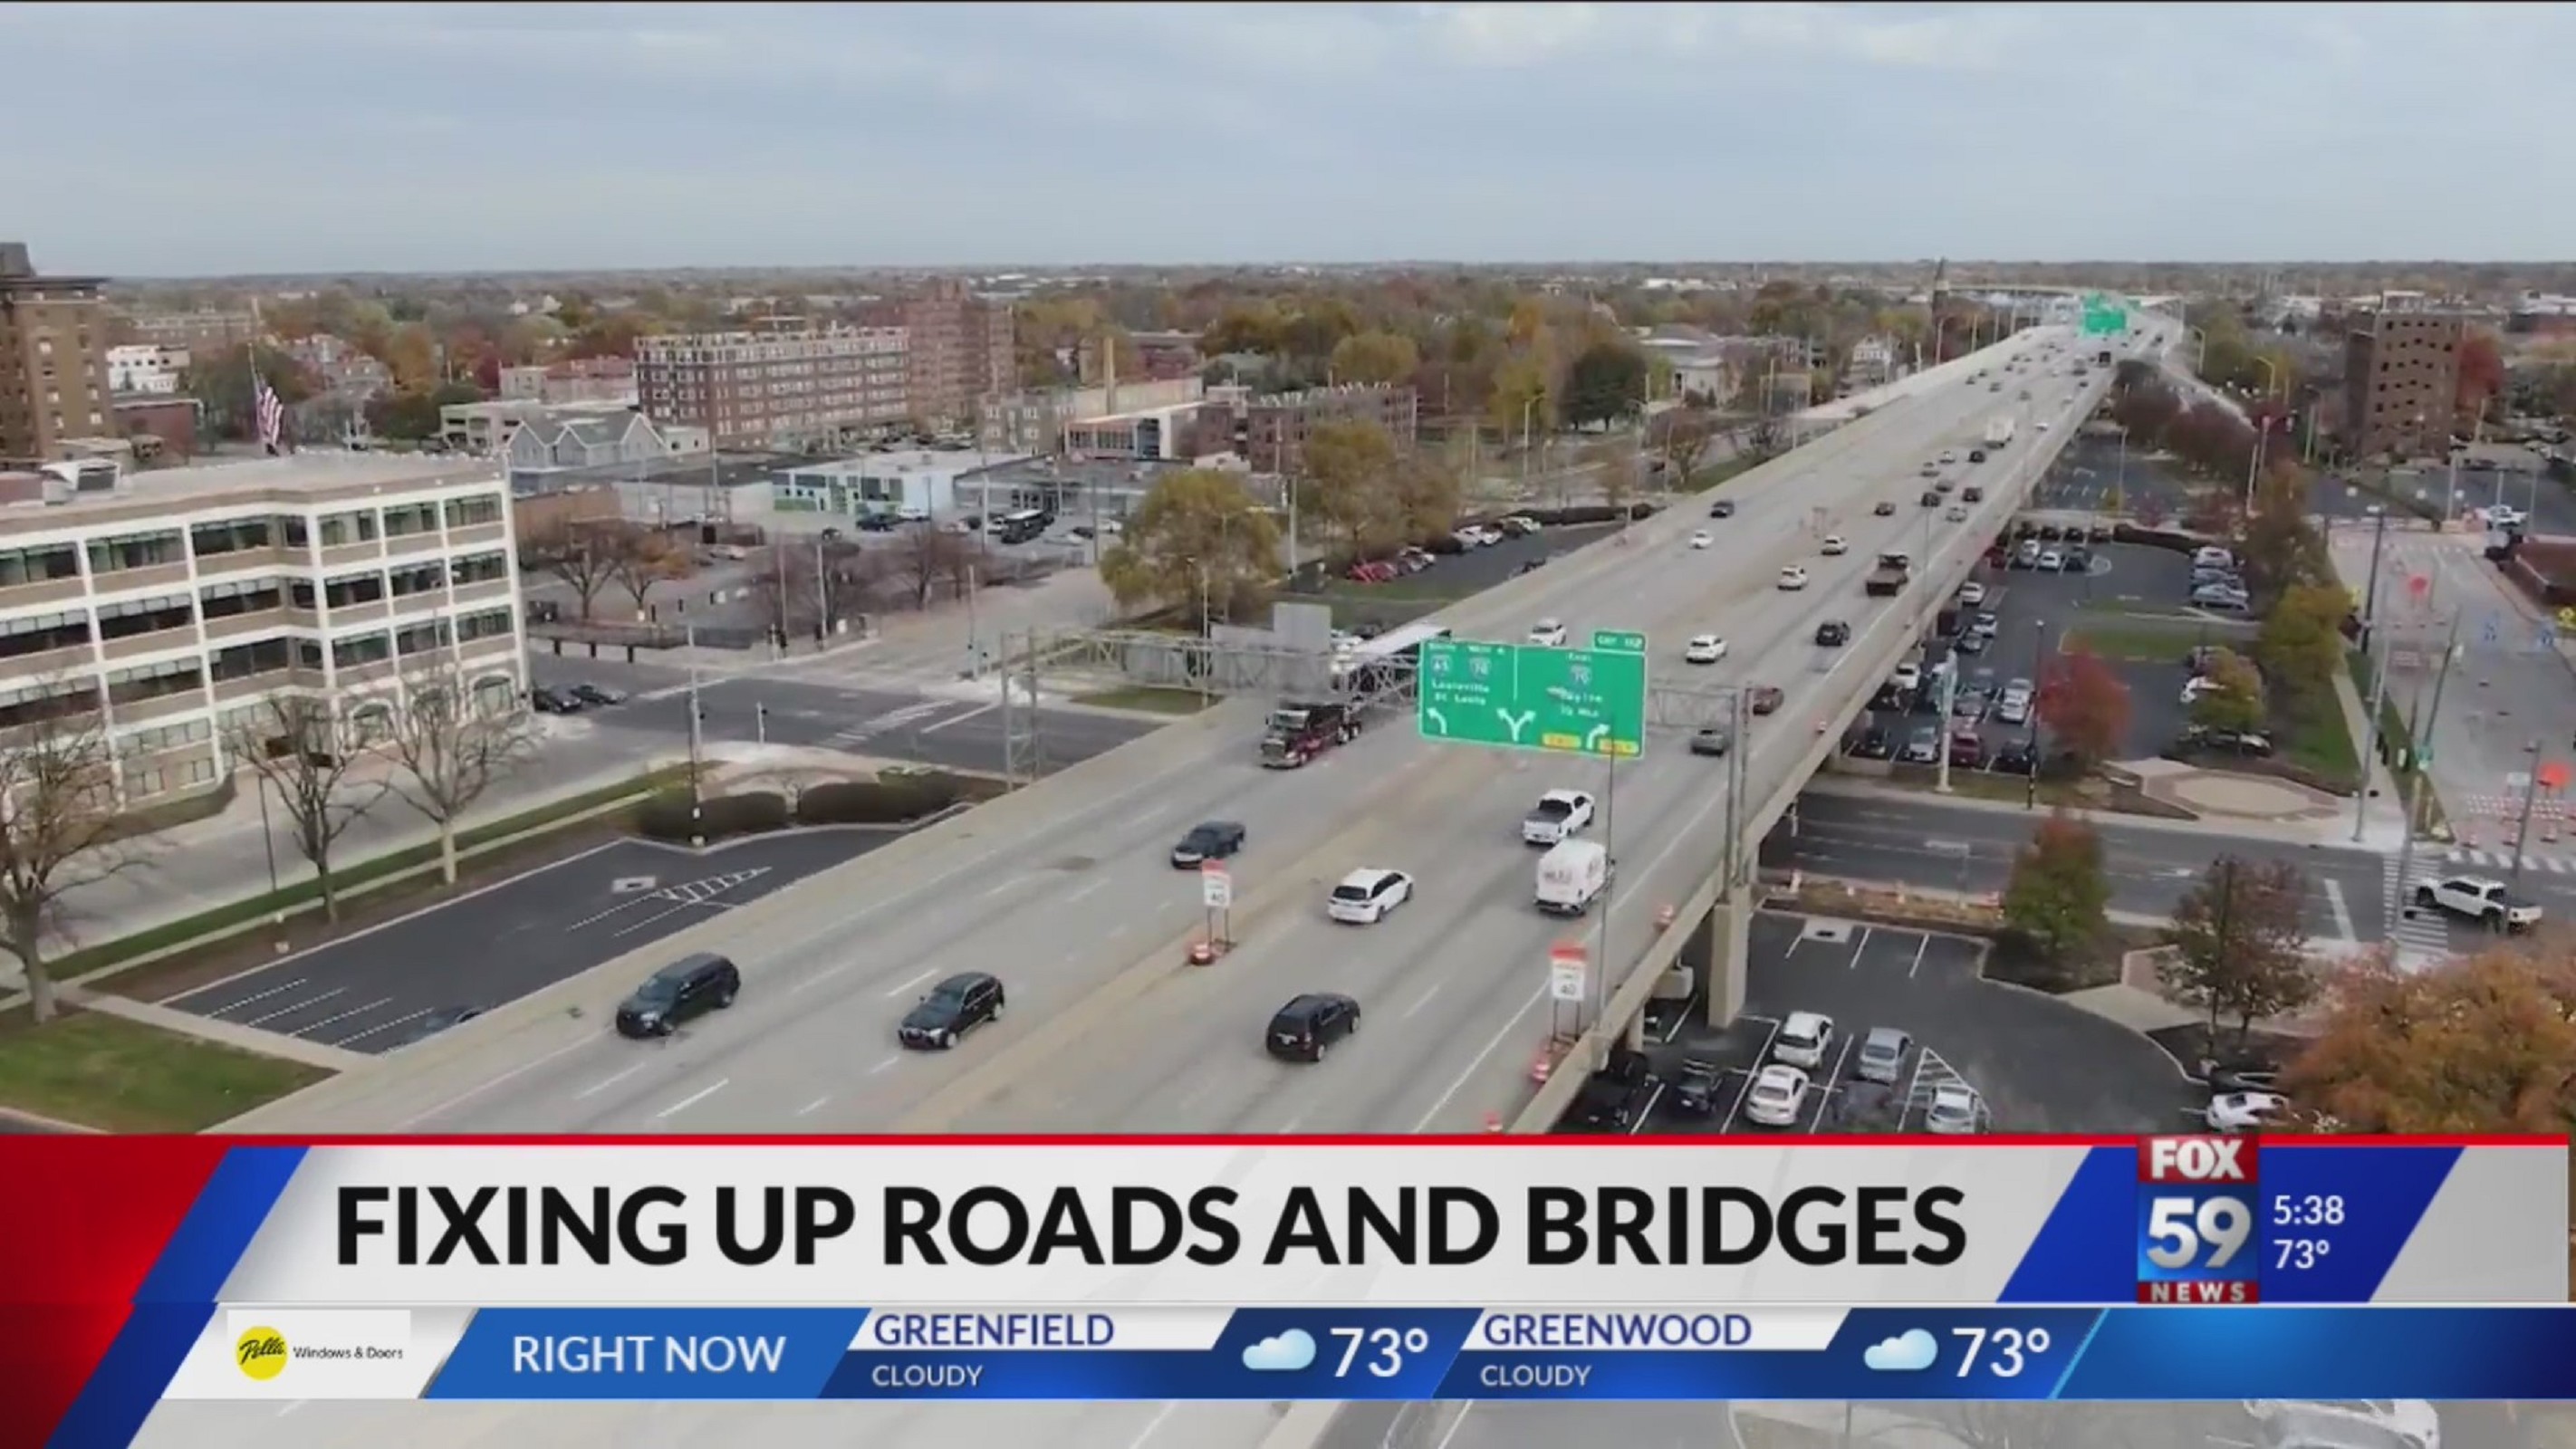 Indiana lawmakers aim to improve roads and bridges